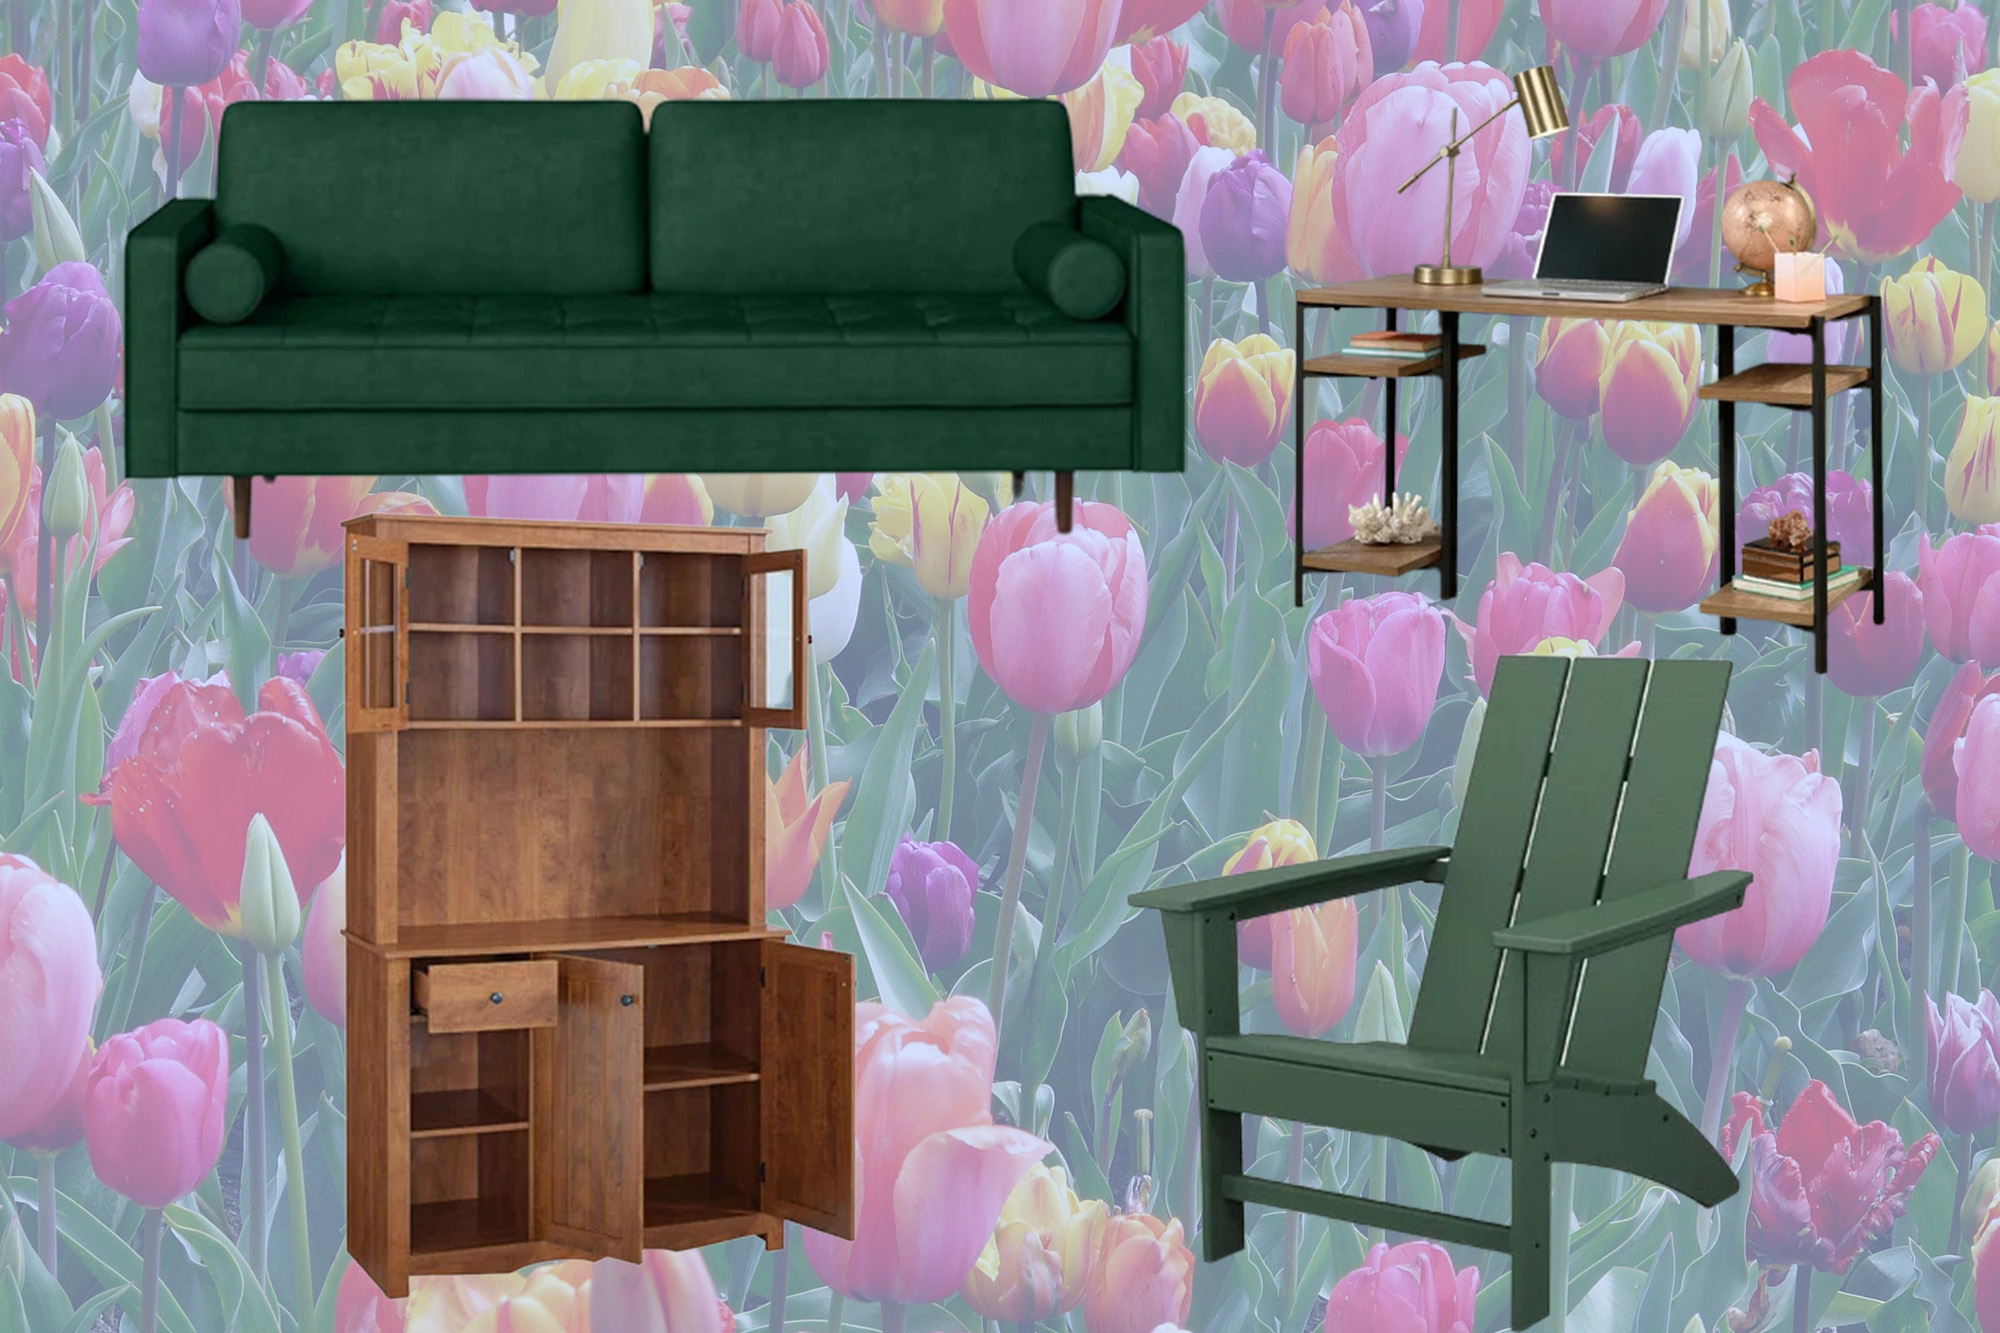 Refresh your decor and save more with Wayfair’s Surprise Spring Savings